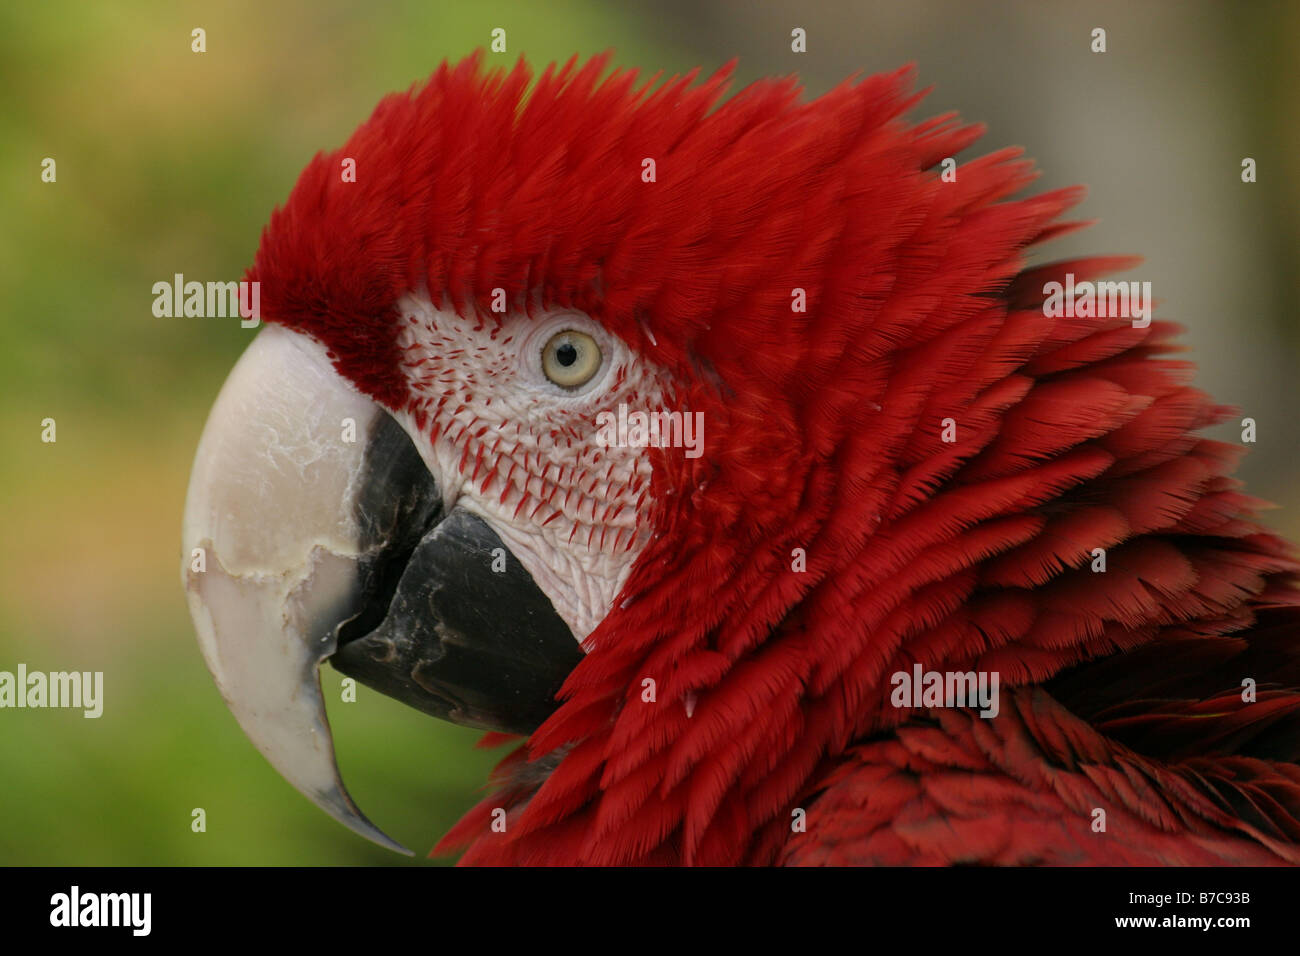 green-winged macaw Stock Photo